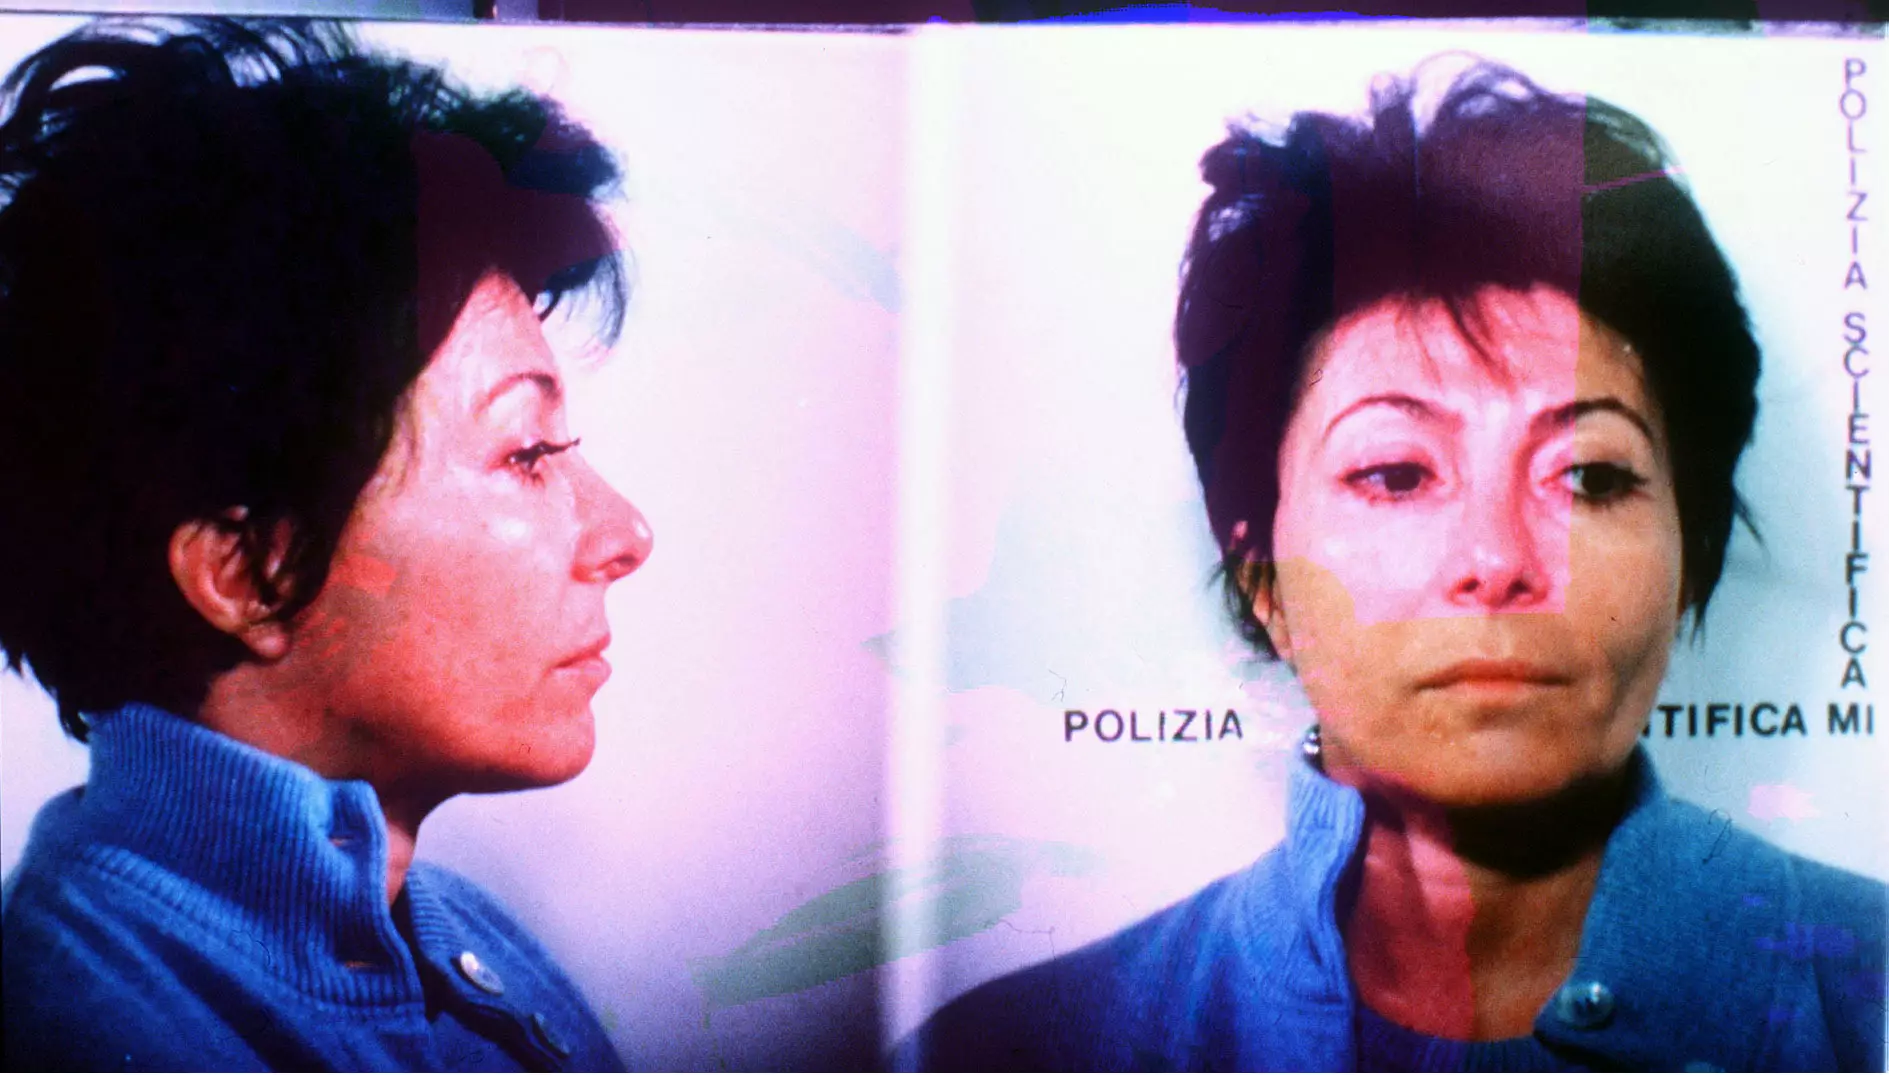 Reggiani in 1997 after being arrested for arranging the murder of her ex husband (